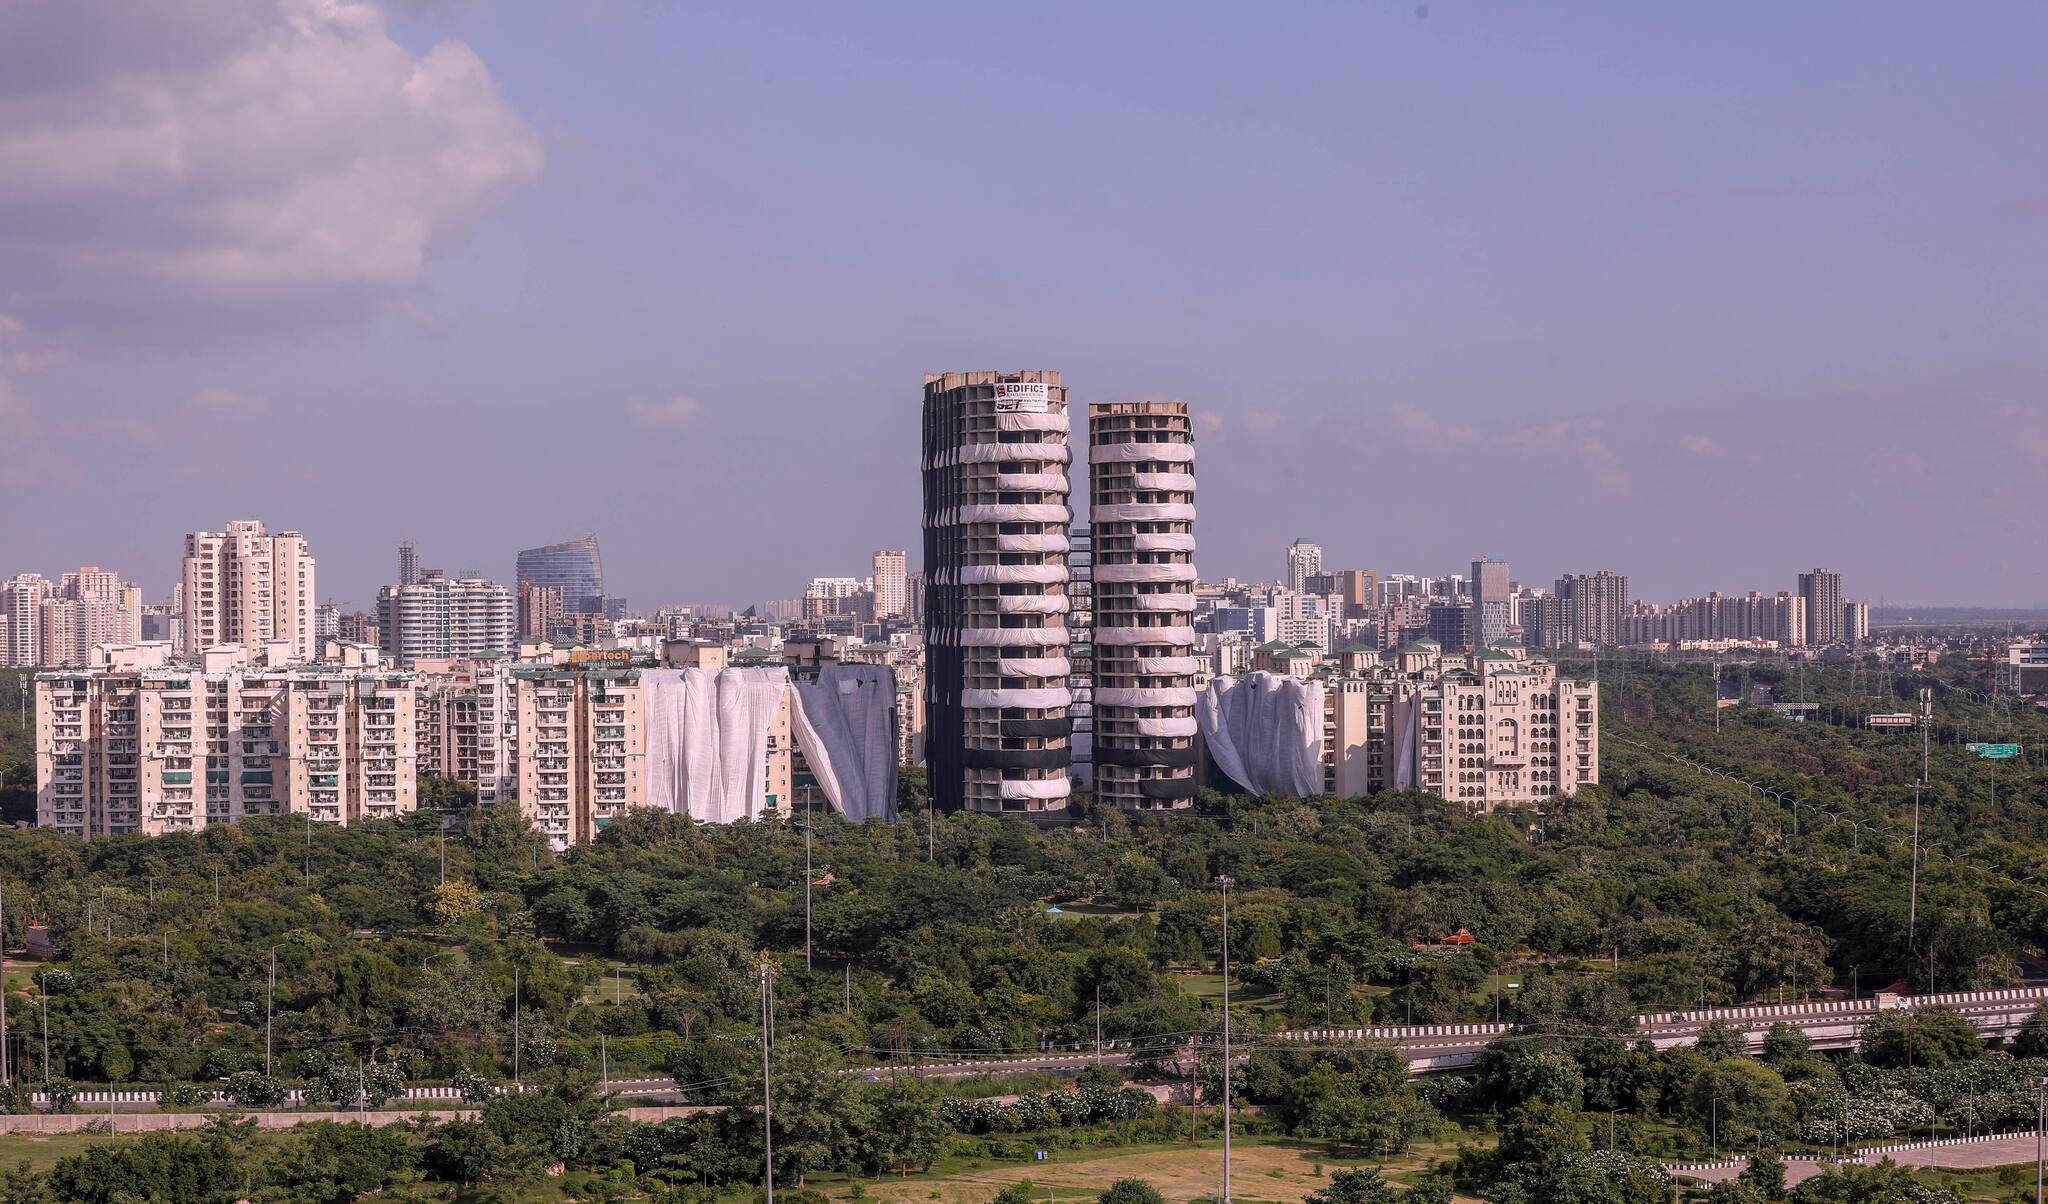 Noida: Buildings of Emerald Court and ATS Village societies, near Supertech's 40-storey twin towers, being covered ahead of the towers' scheduled demolition on Aug. 28, in Noida, Tuesday, Aug. 23, 2022. (PTI Photo)(